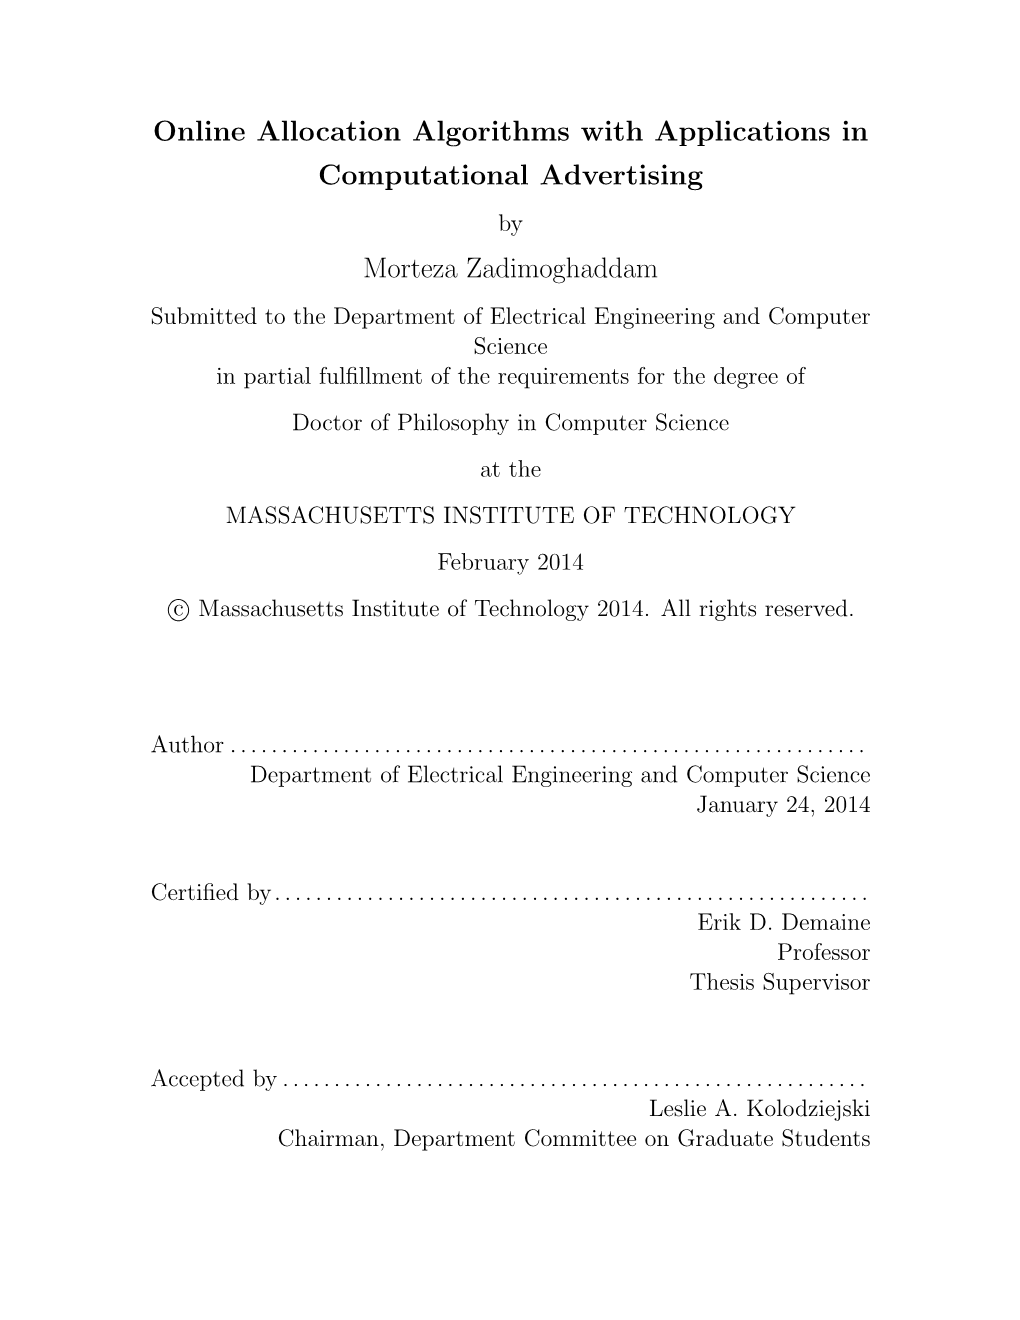 Online Allocation Algorithms with Applications in Computational Advertising Morteza Zadimoghaddam